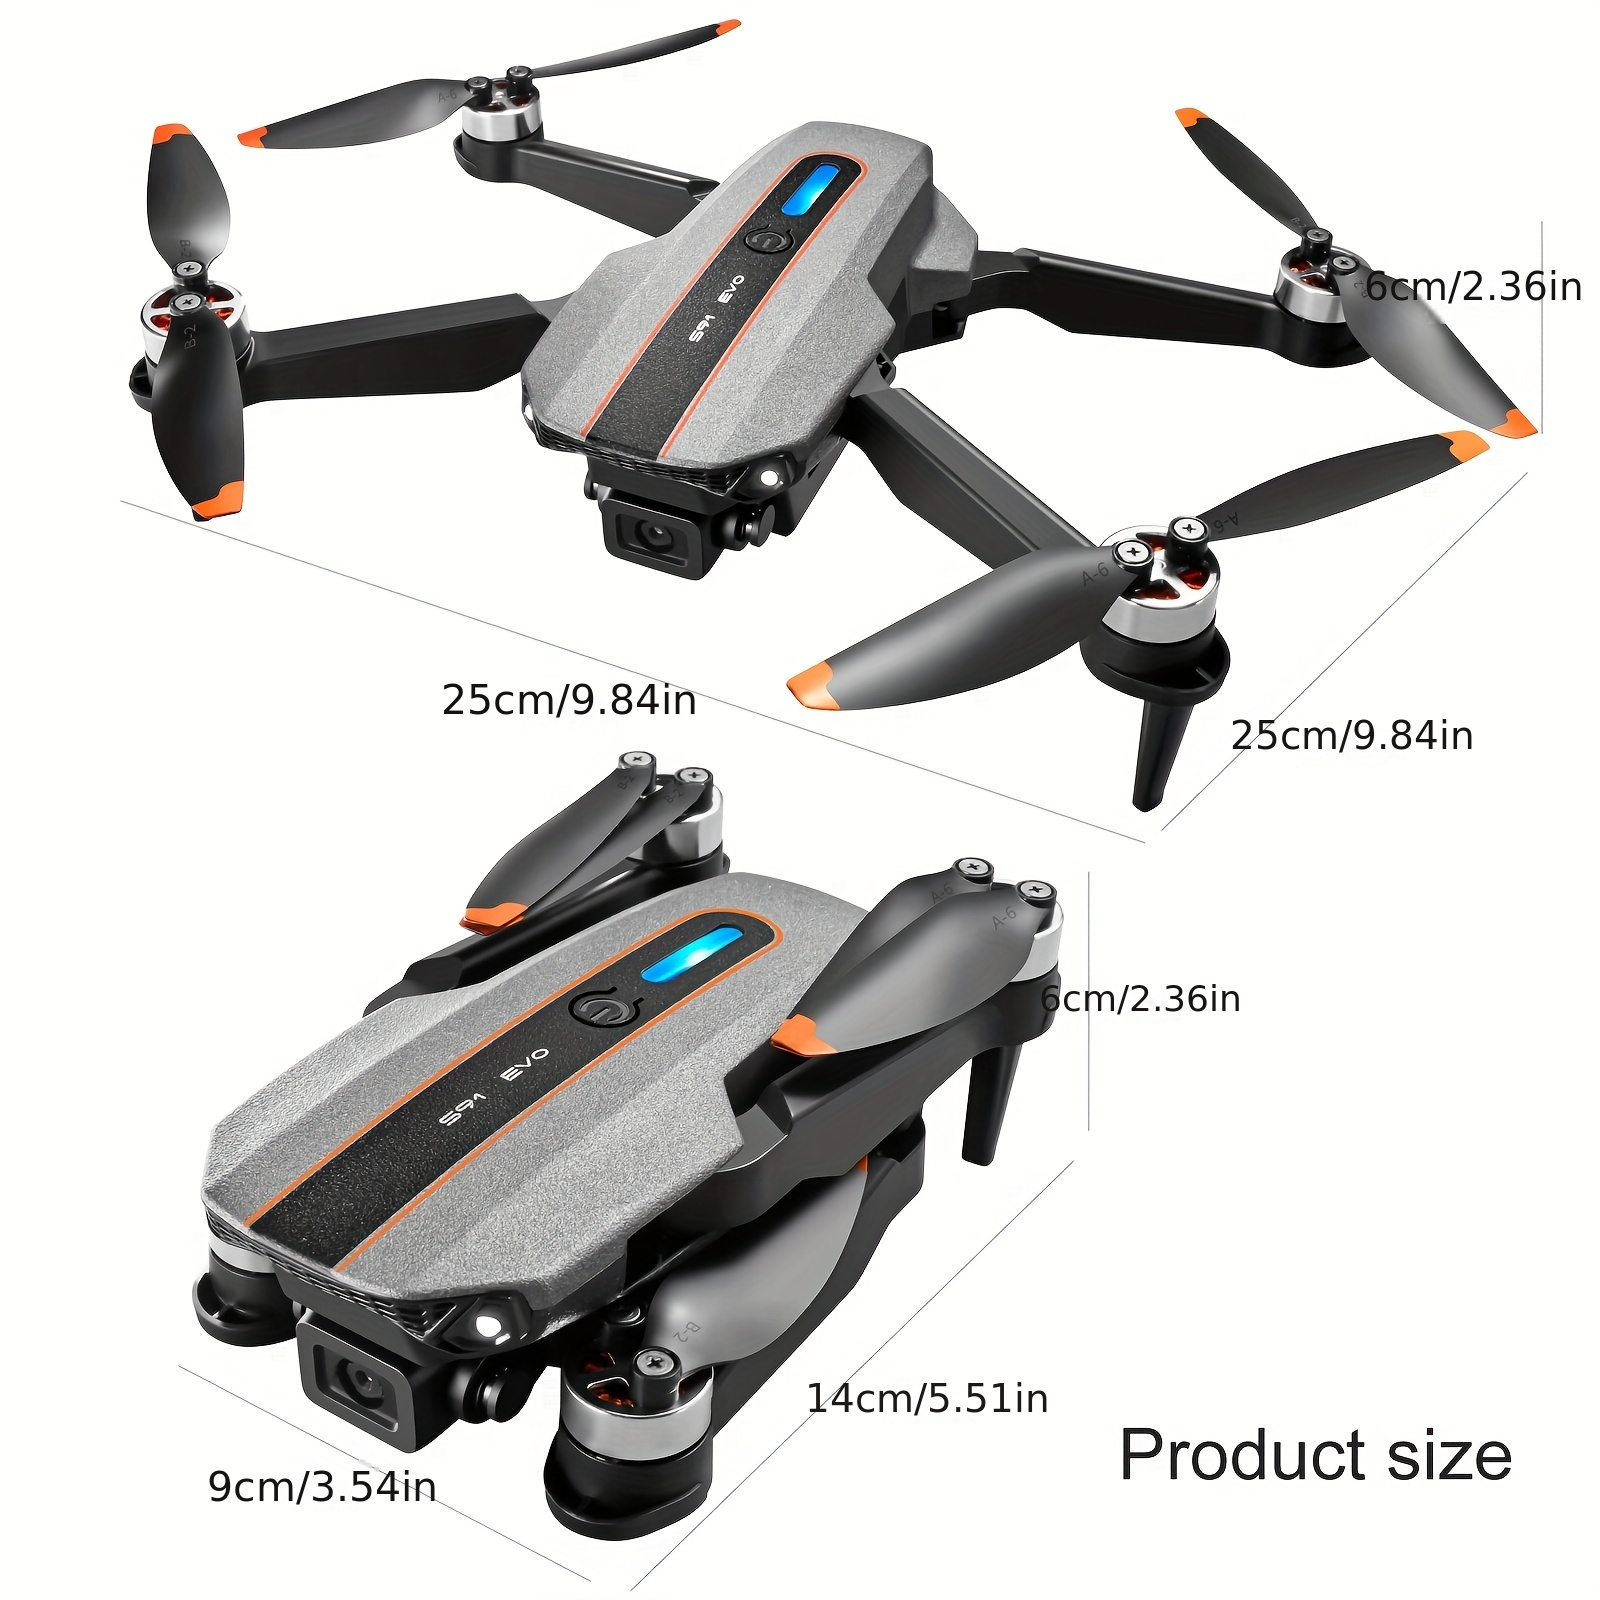 s91 remote remote control drone with hd dual camera adjustable headless mode track flying one key surround smart follow brushless motor drone self with optical flow positioning function details 18